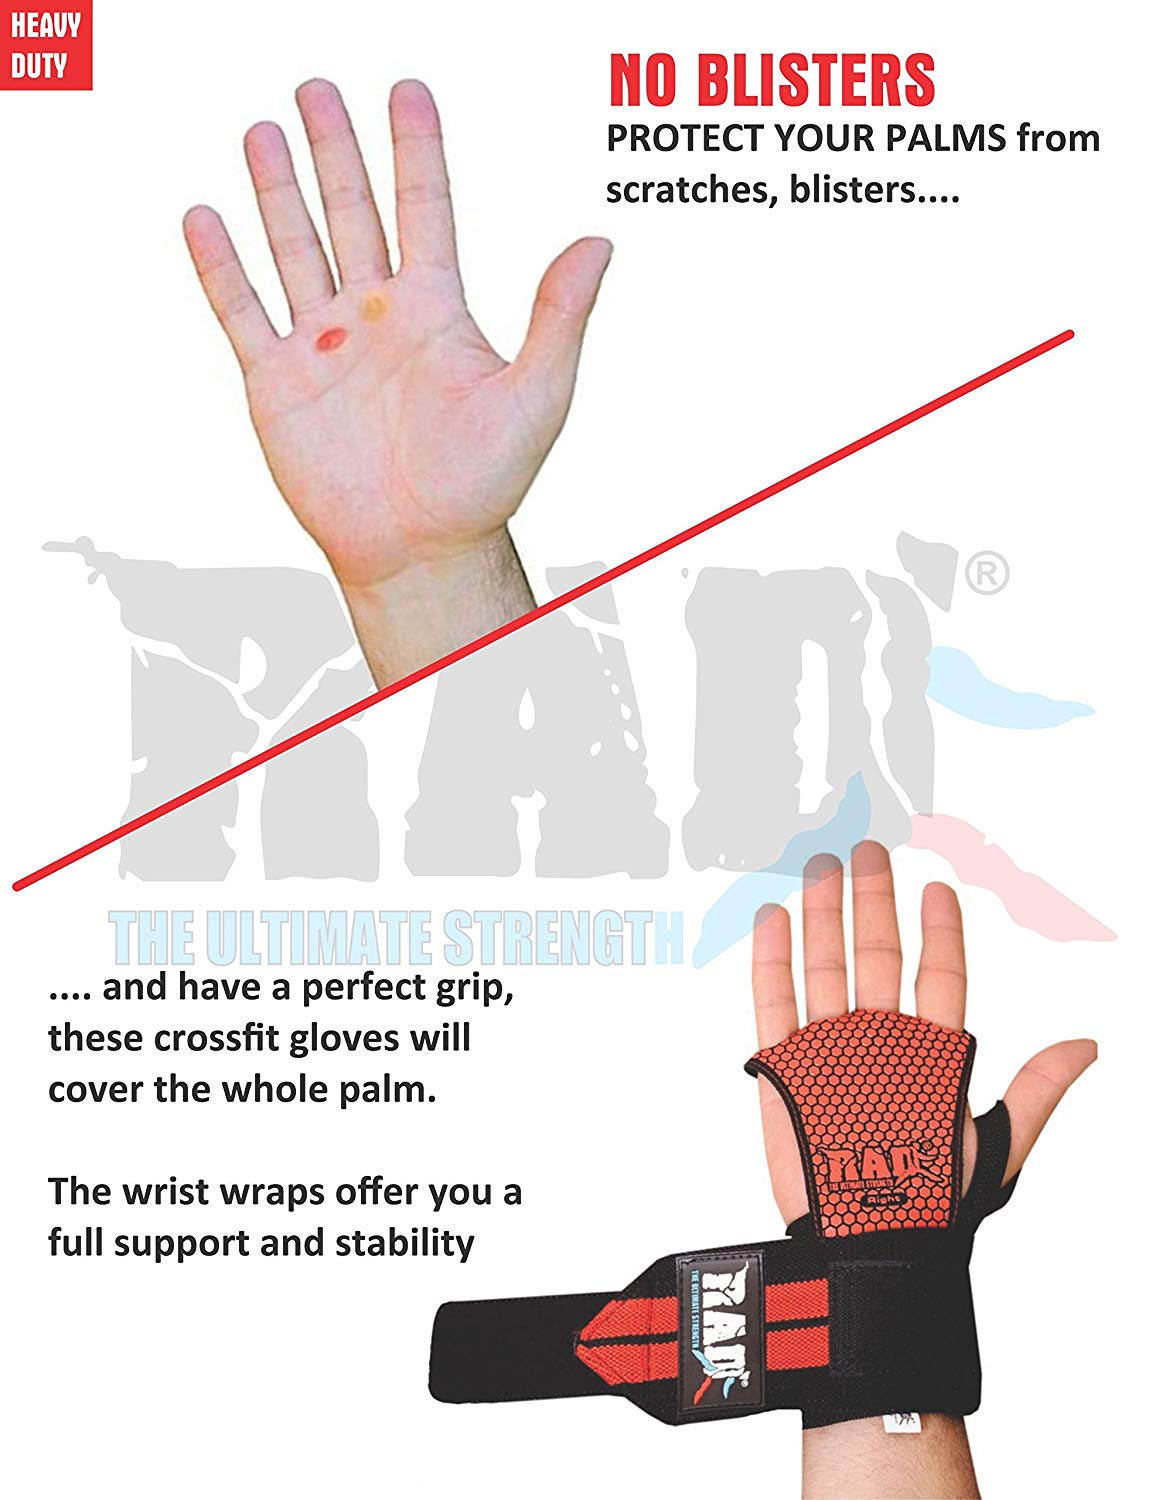 RAD Gymnastics Hand Grips, Leather Hand Grips for CrossFit Grips for Pull-ups, Weight Lifting Hand Protection from Rips and Blisters